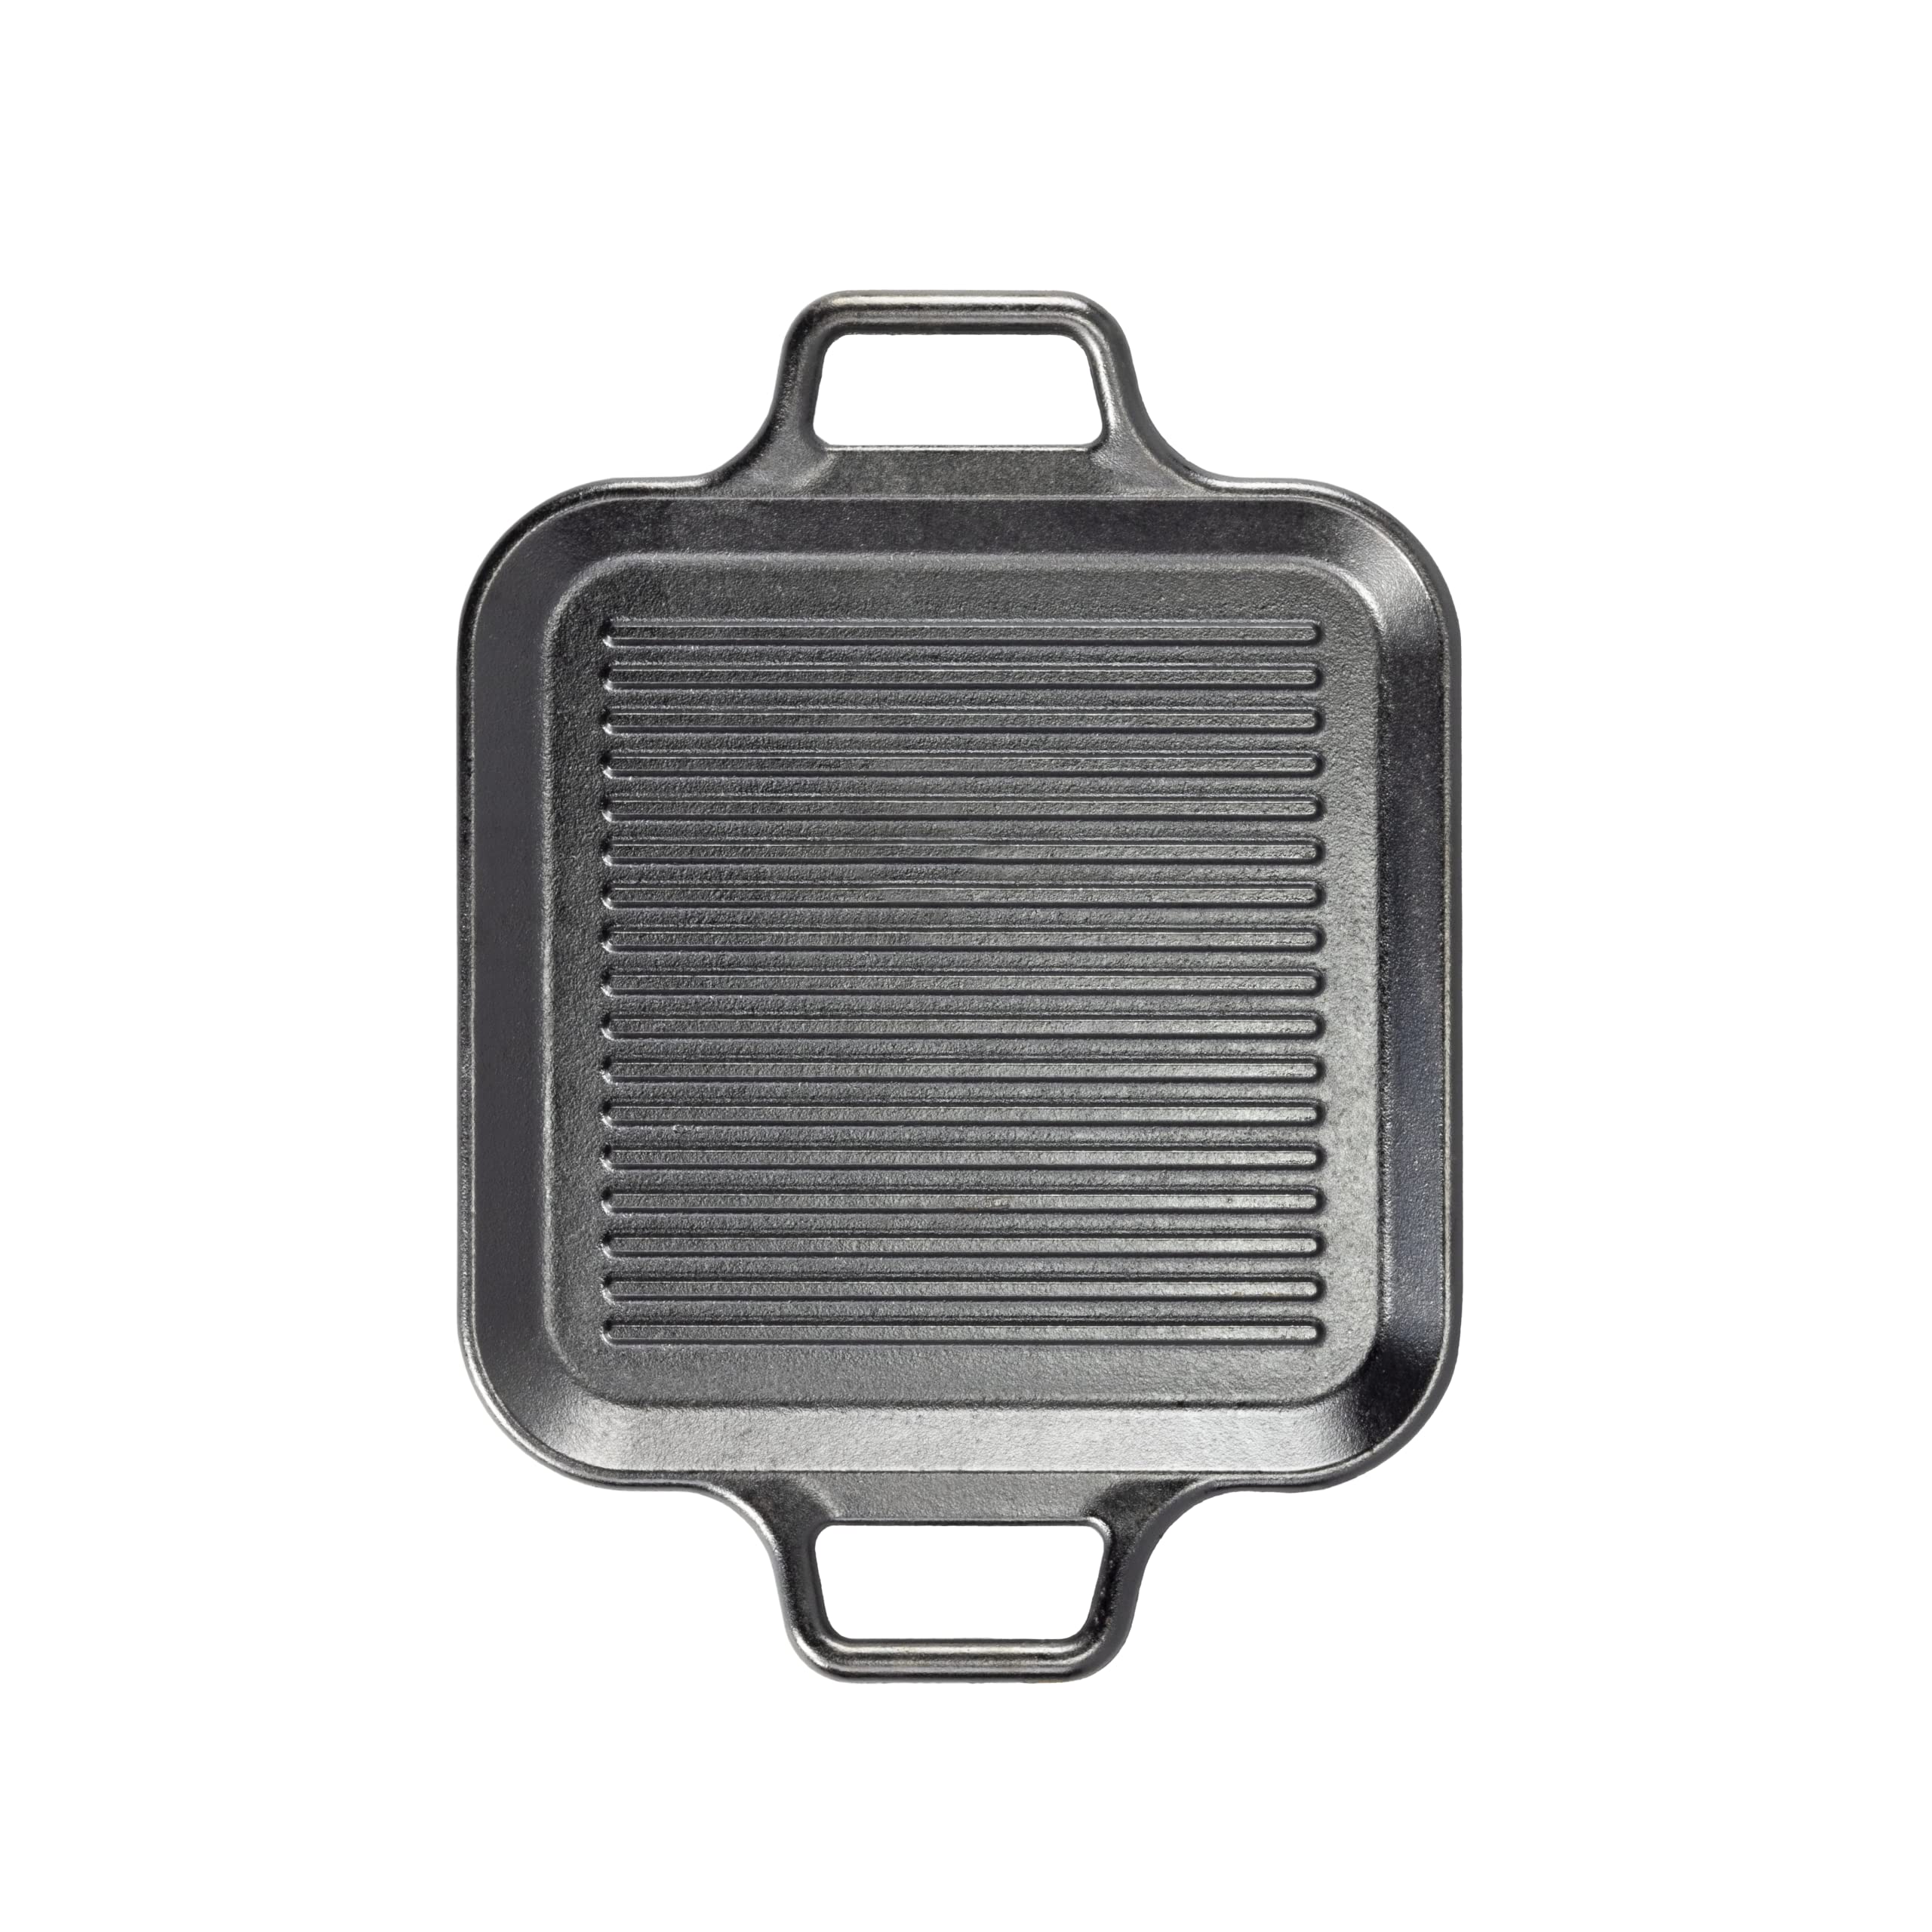 Lodge BOLD 12 Inch Seasoned Cast Iron Grill Pan with Loop Handles; Design-Forward Cookware